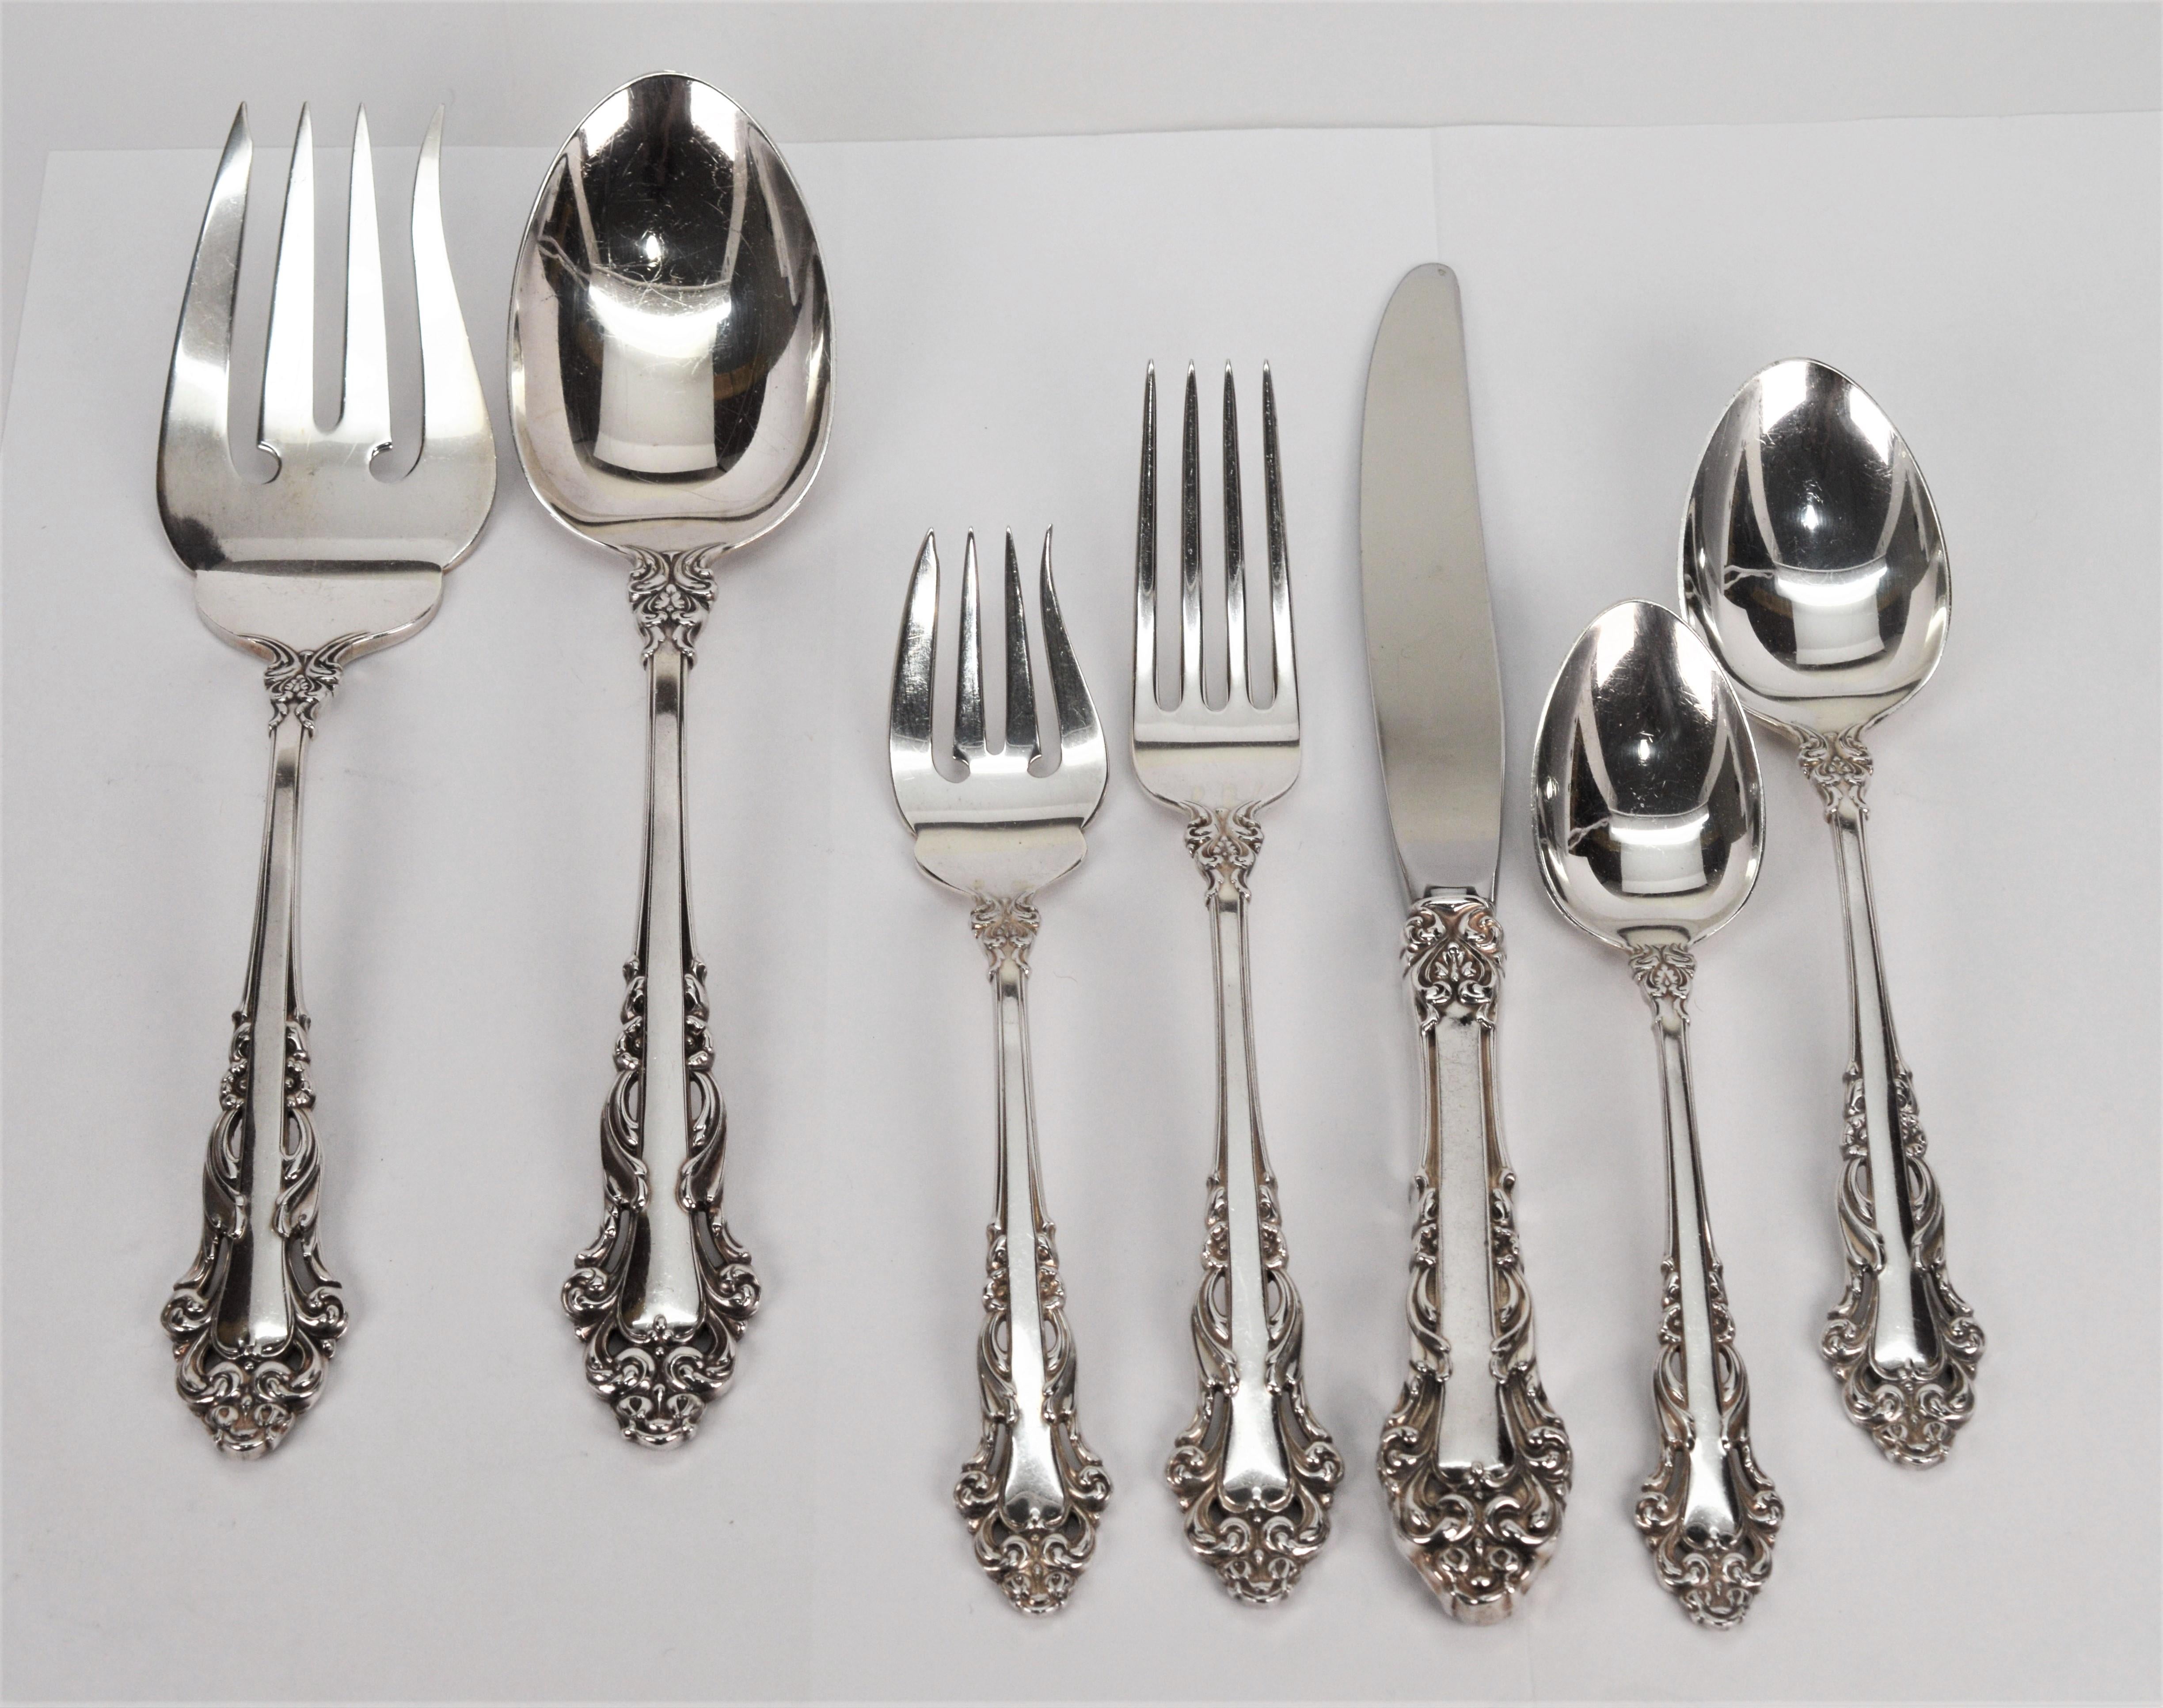 Reed & Barton Grande Renaissance Sterling Silver Flatware 5P Setting for 12  In Good Condition For Sale In Mount Kisco, NY